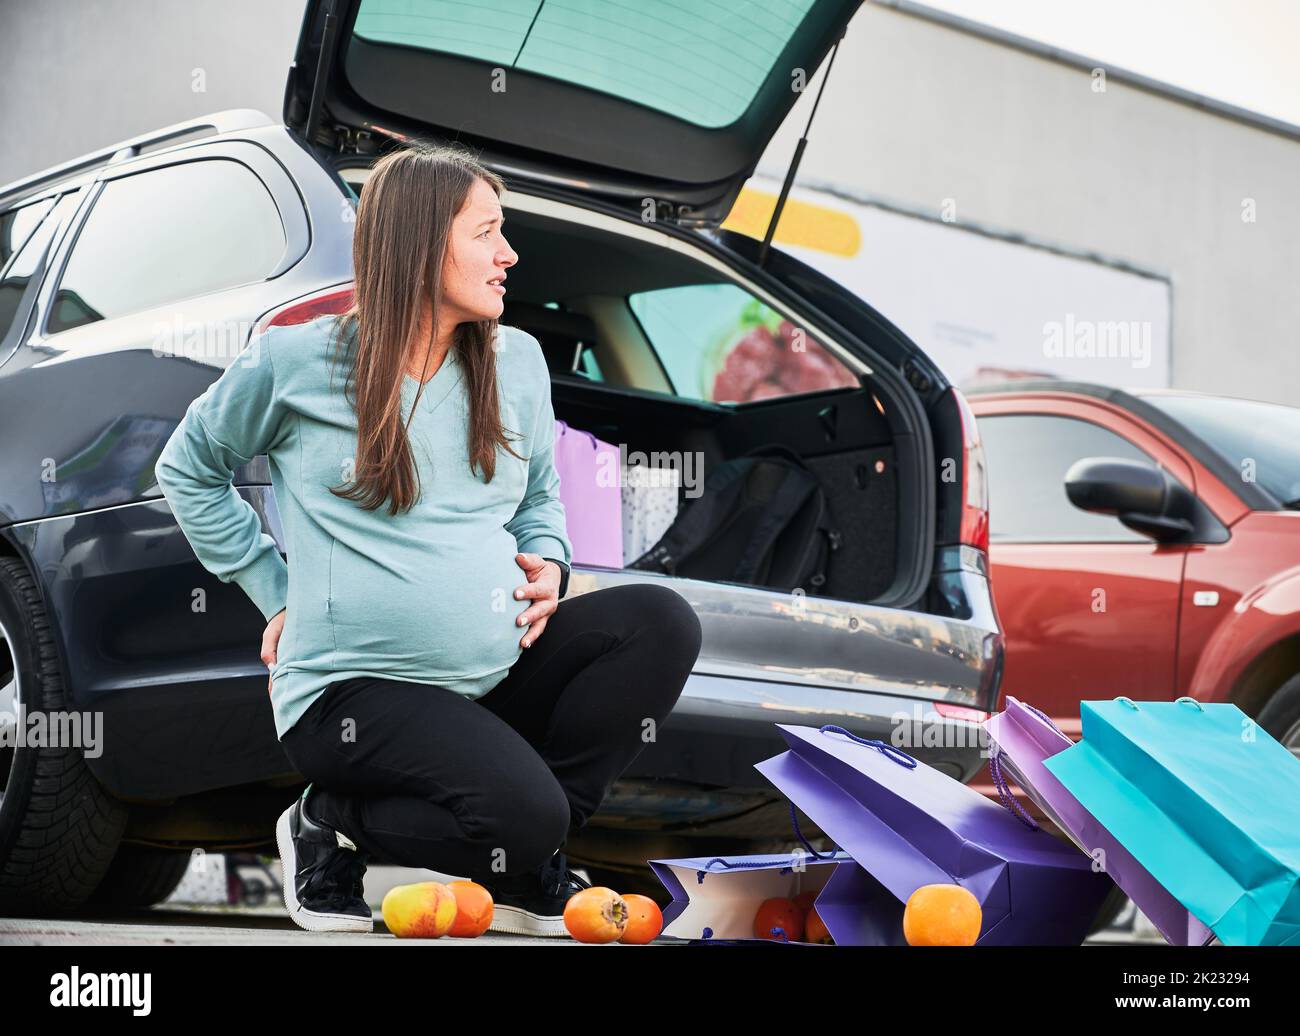 Pregnant woman waiting for ambulance during premature childbirth at car parking in city. Female with paper bags feeling pain in belly abdomen have birth contractions after shopping time. Stock Photo